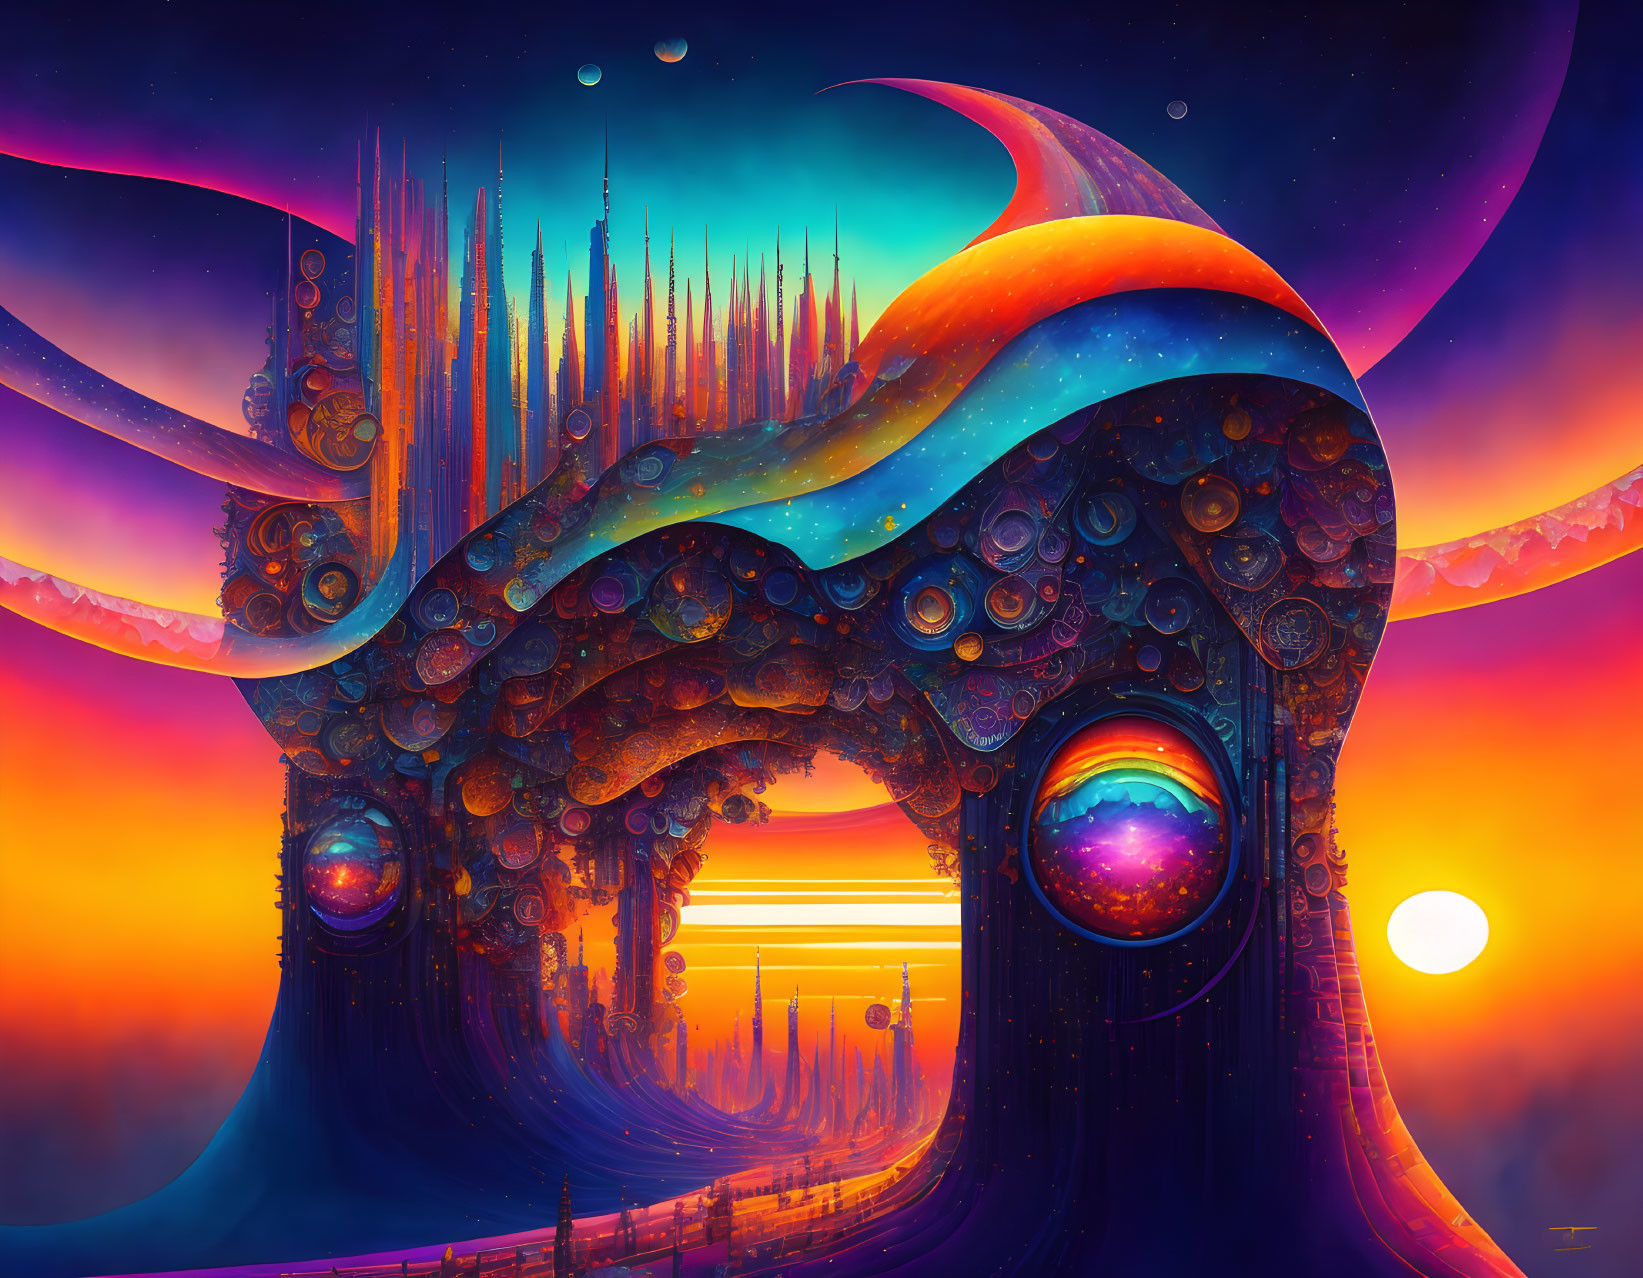 Colorful surreal landscape with swirling wave-like structure and pathway towards horizon.